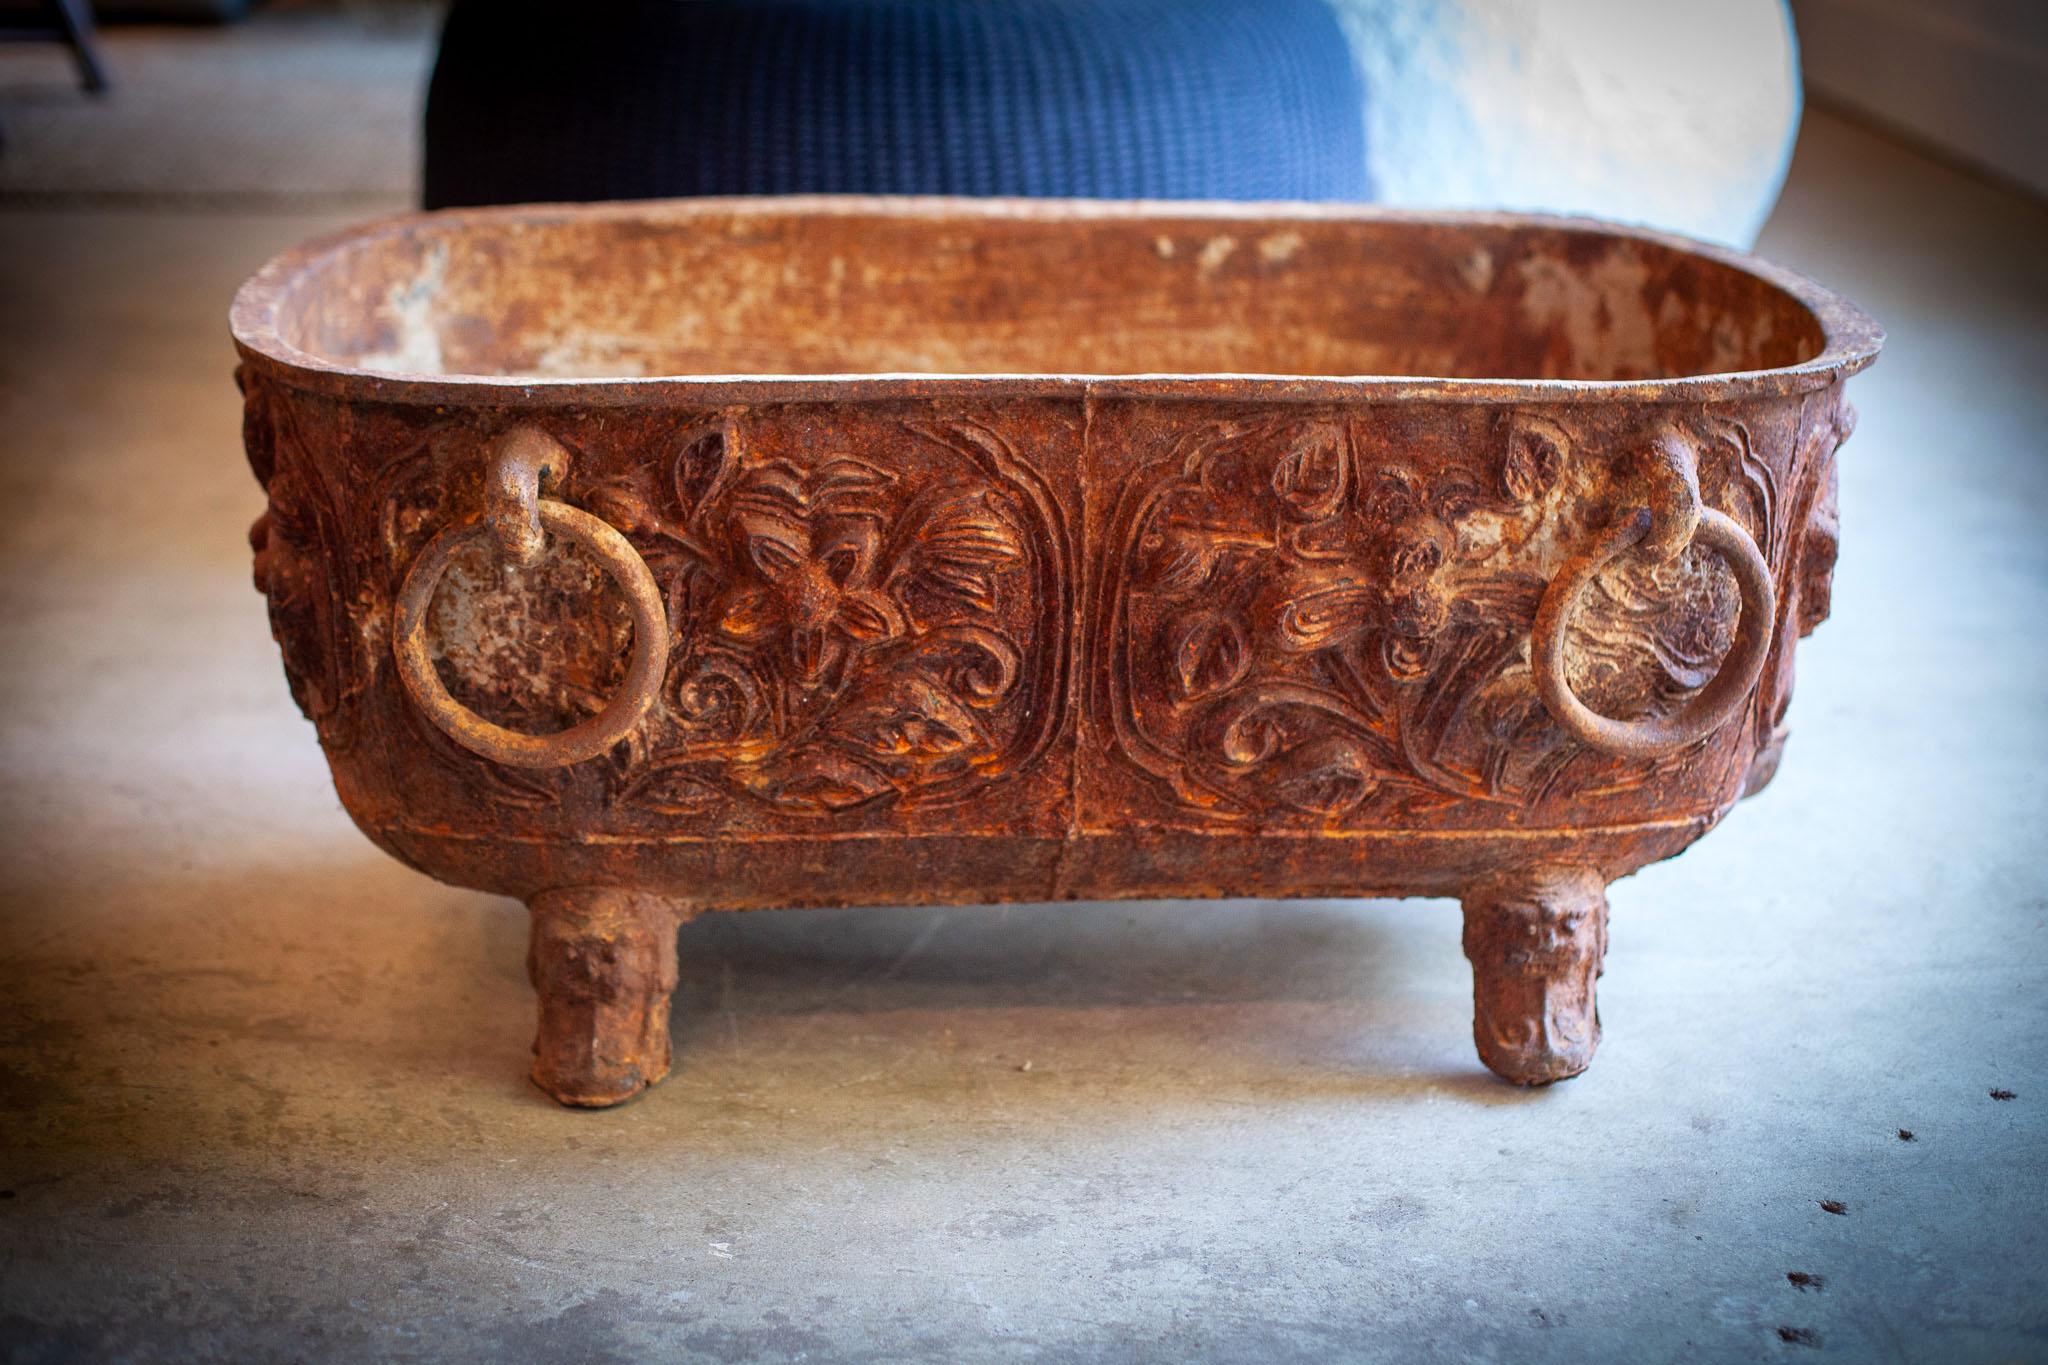 Early 19th to mid 19th century Chinese, Iron, water bath.
With the patina of decades, this cast-iron sarcophagus-shaped bath has its original handles and exudes a timeless floral decoration. This example is extremely old and has a surface that only